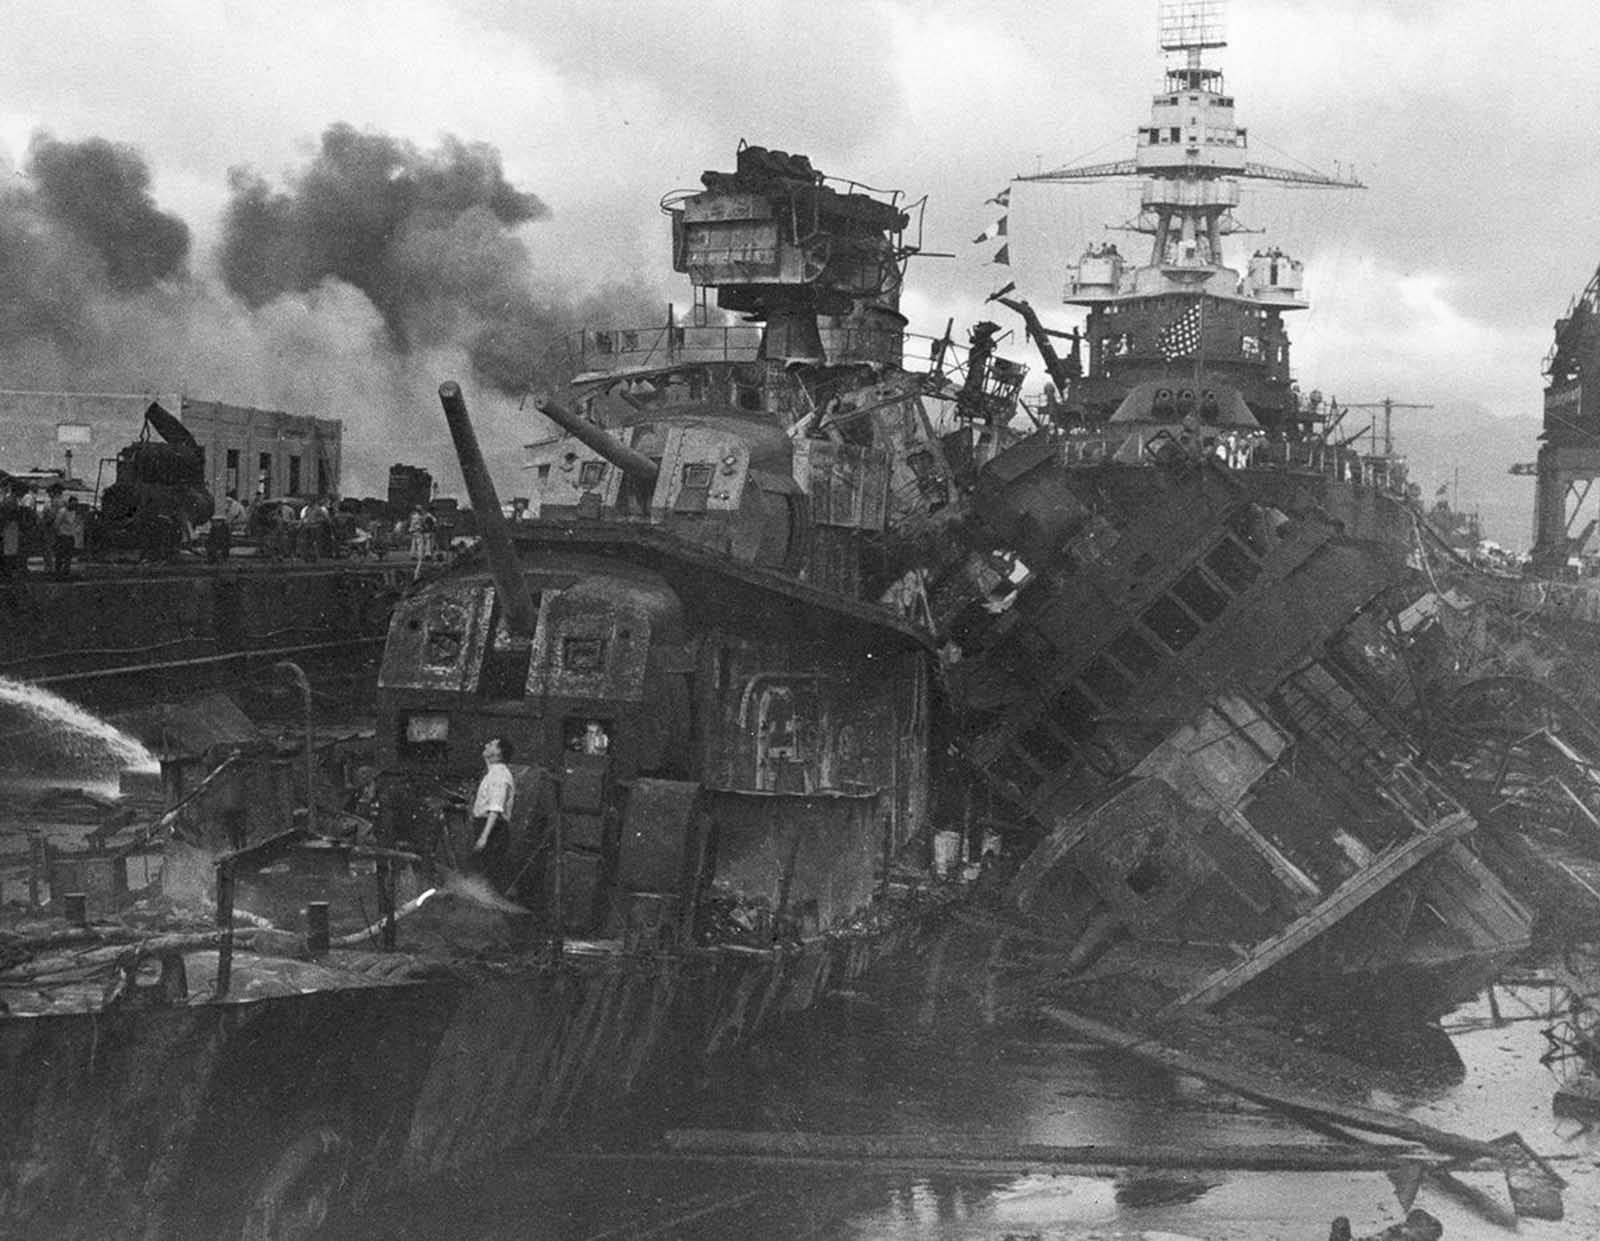 Heavy damage is seen on the destroyers USS Downes and USS Cassin, stationed at Pearl Harbor, after the Japanese attack on the Hawaiian island on December 7, 1941.